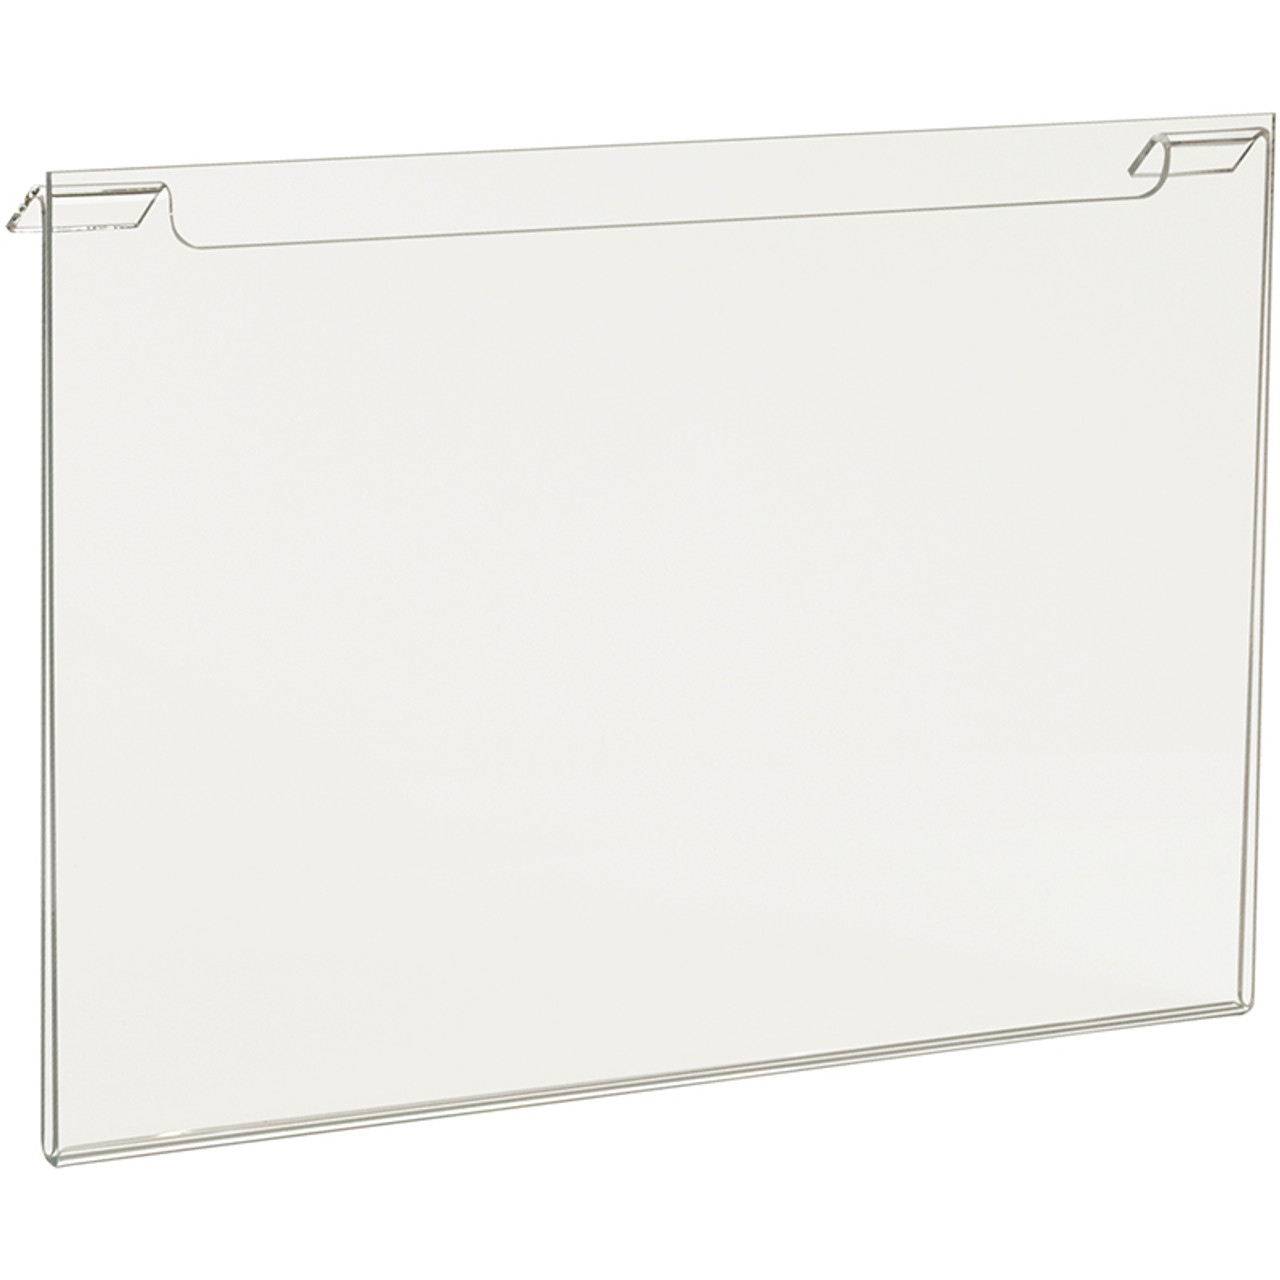 HP/SG711H Acrylic 7" x 11" Sign Holder for Slatwall/Gridwall